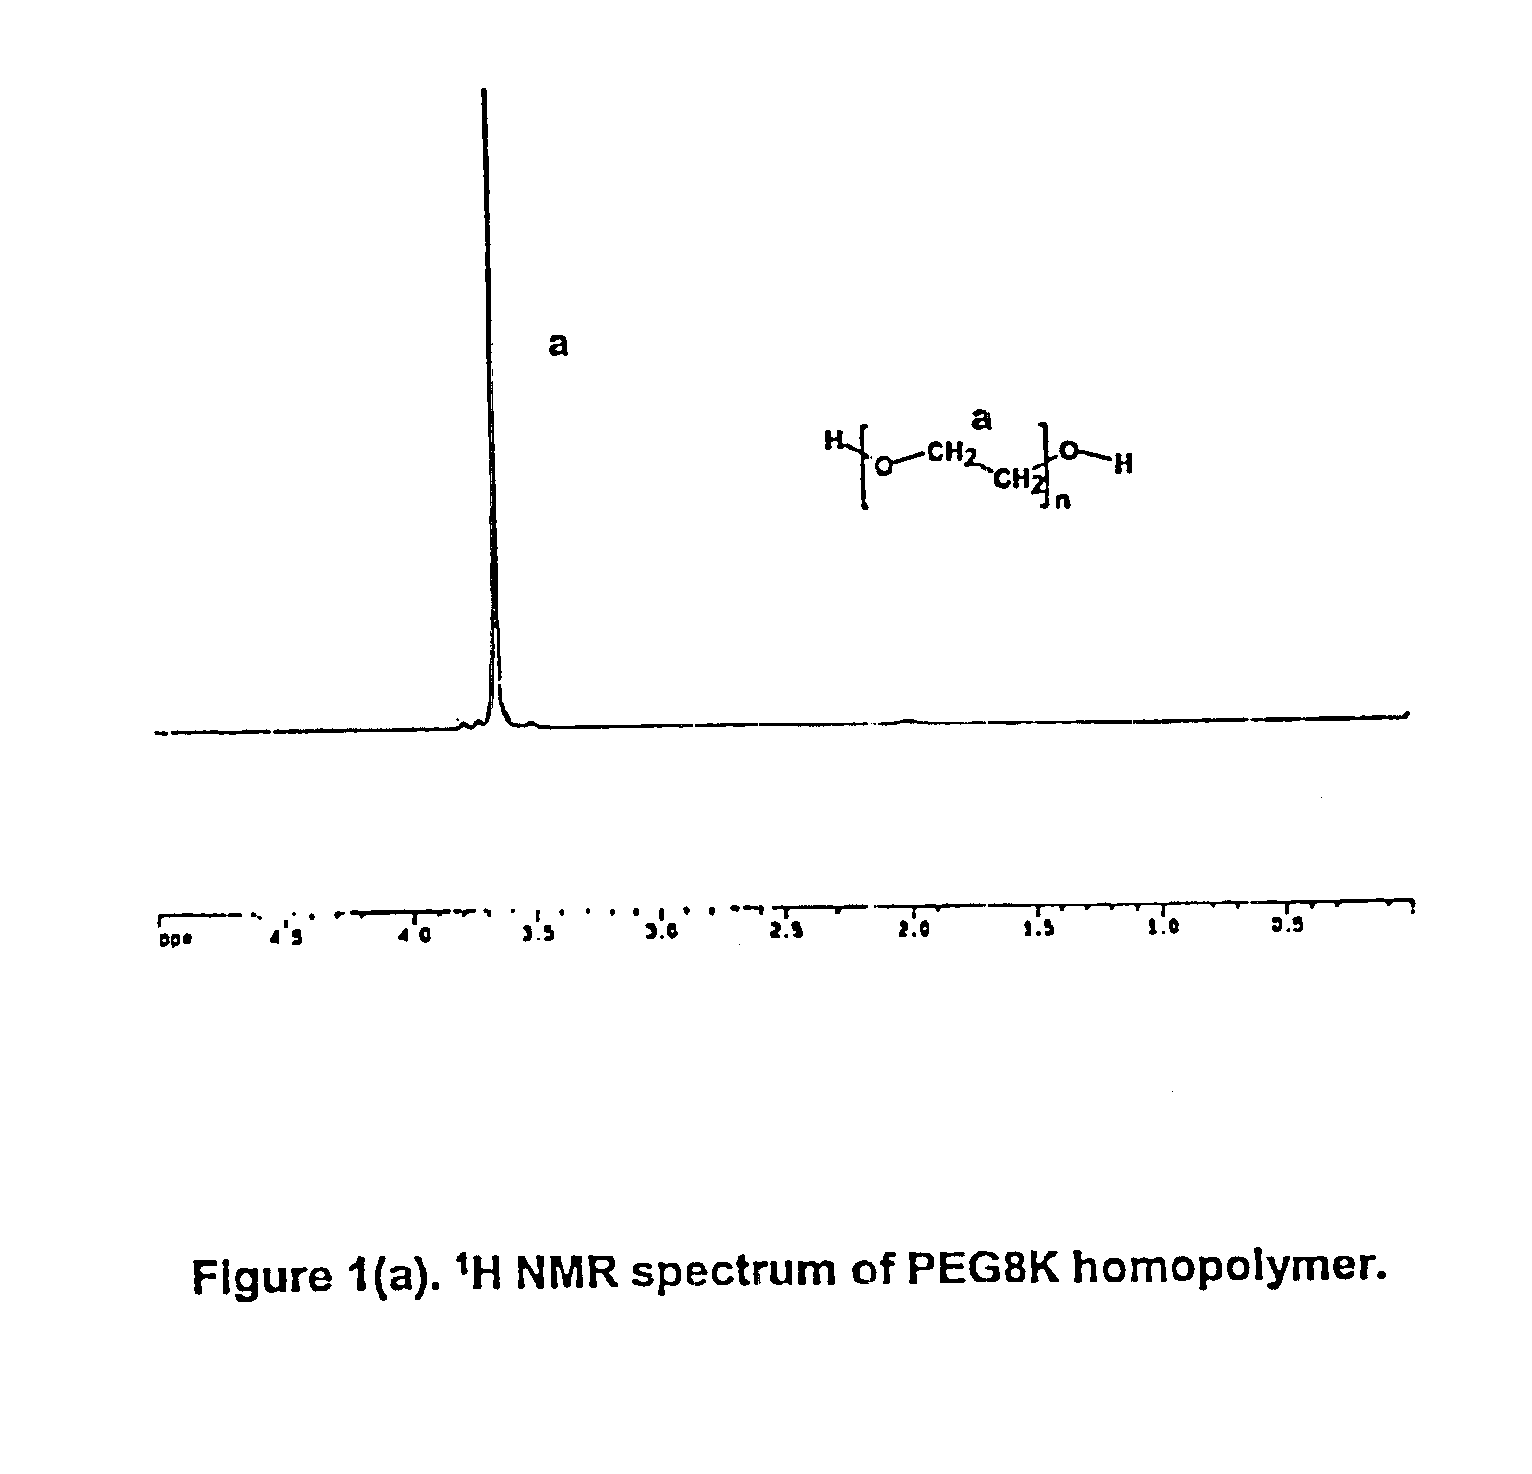 Nonionic telechelic polymers incorporating polyhedral oligosilsesquioxane (POSS) and uses thereof